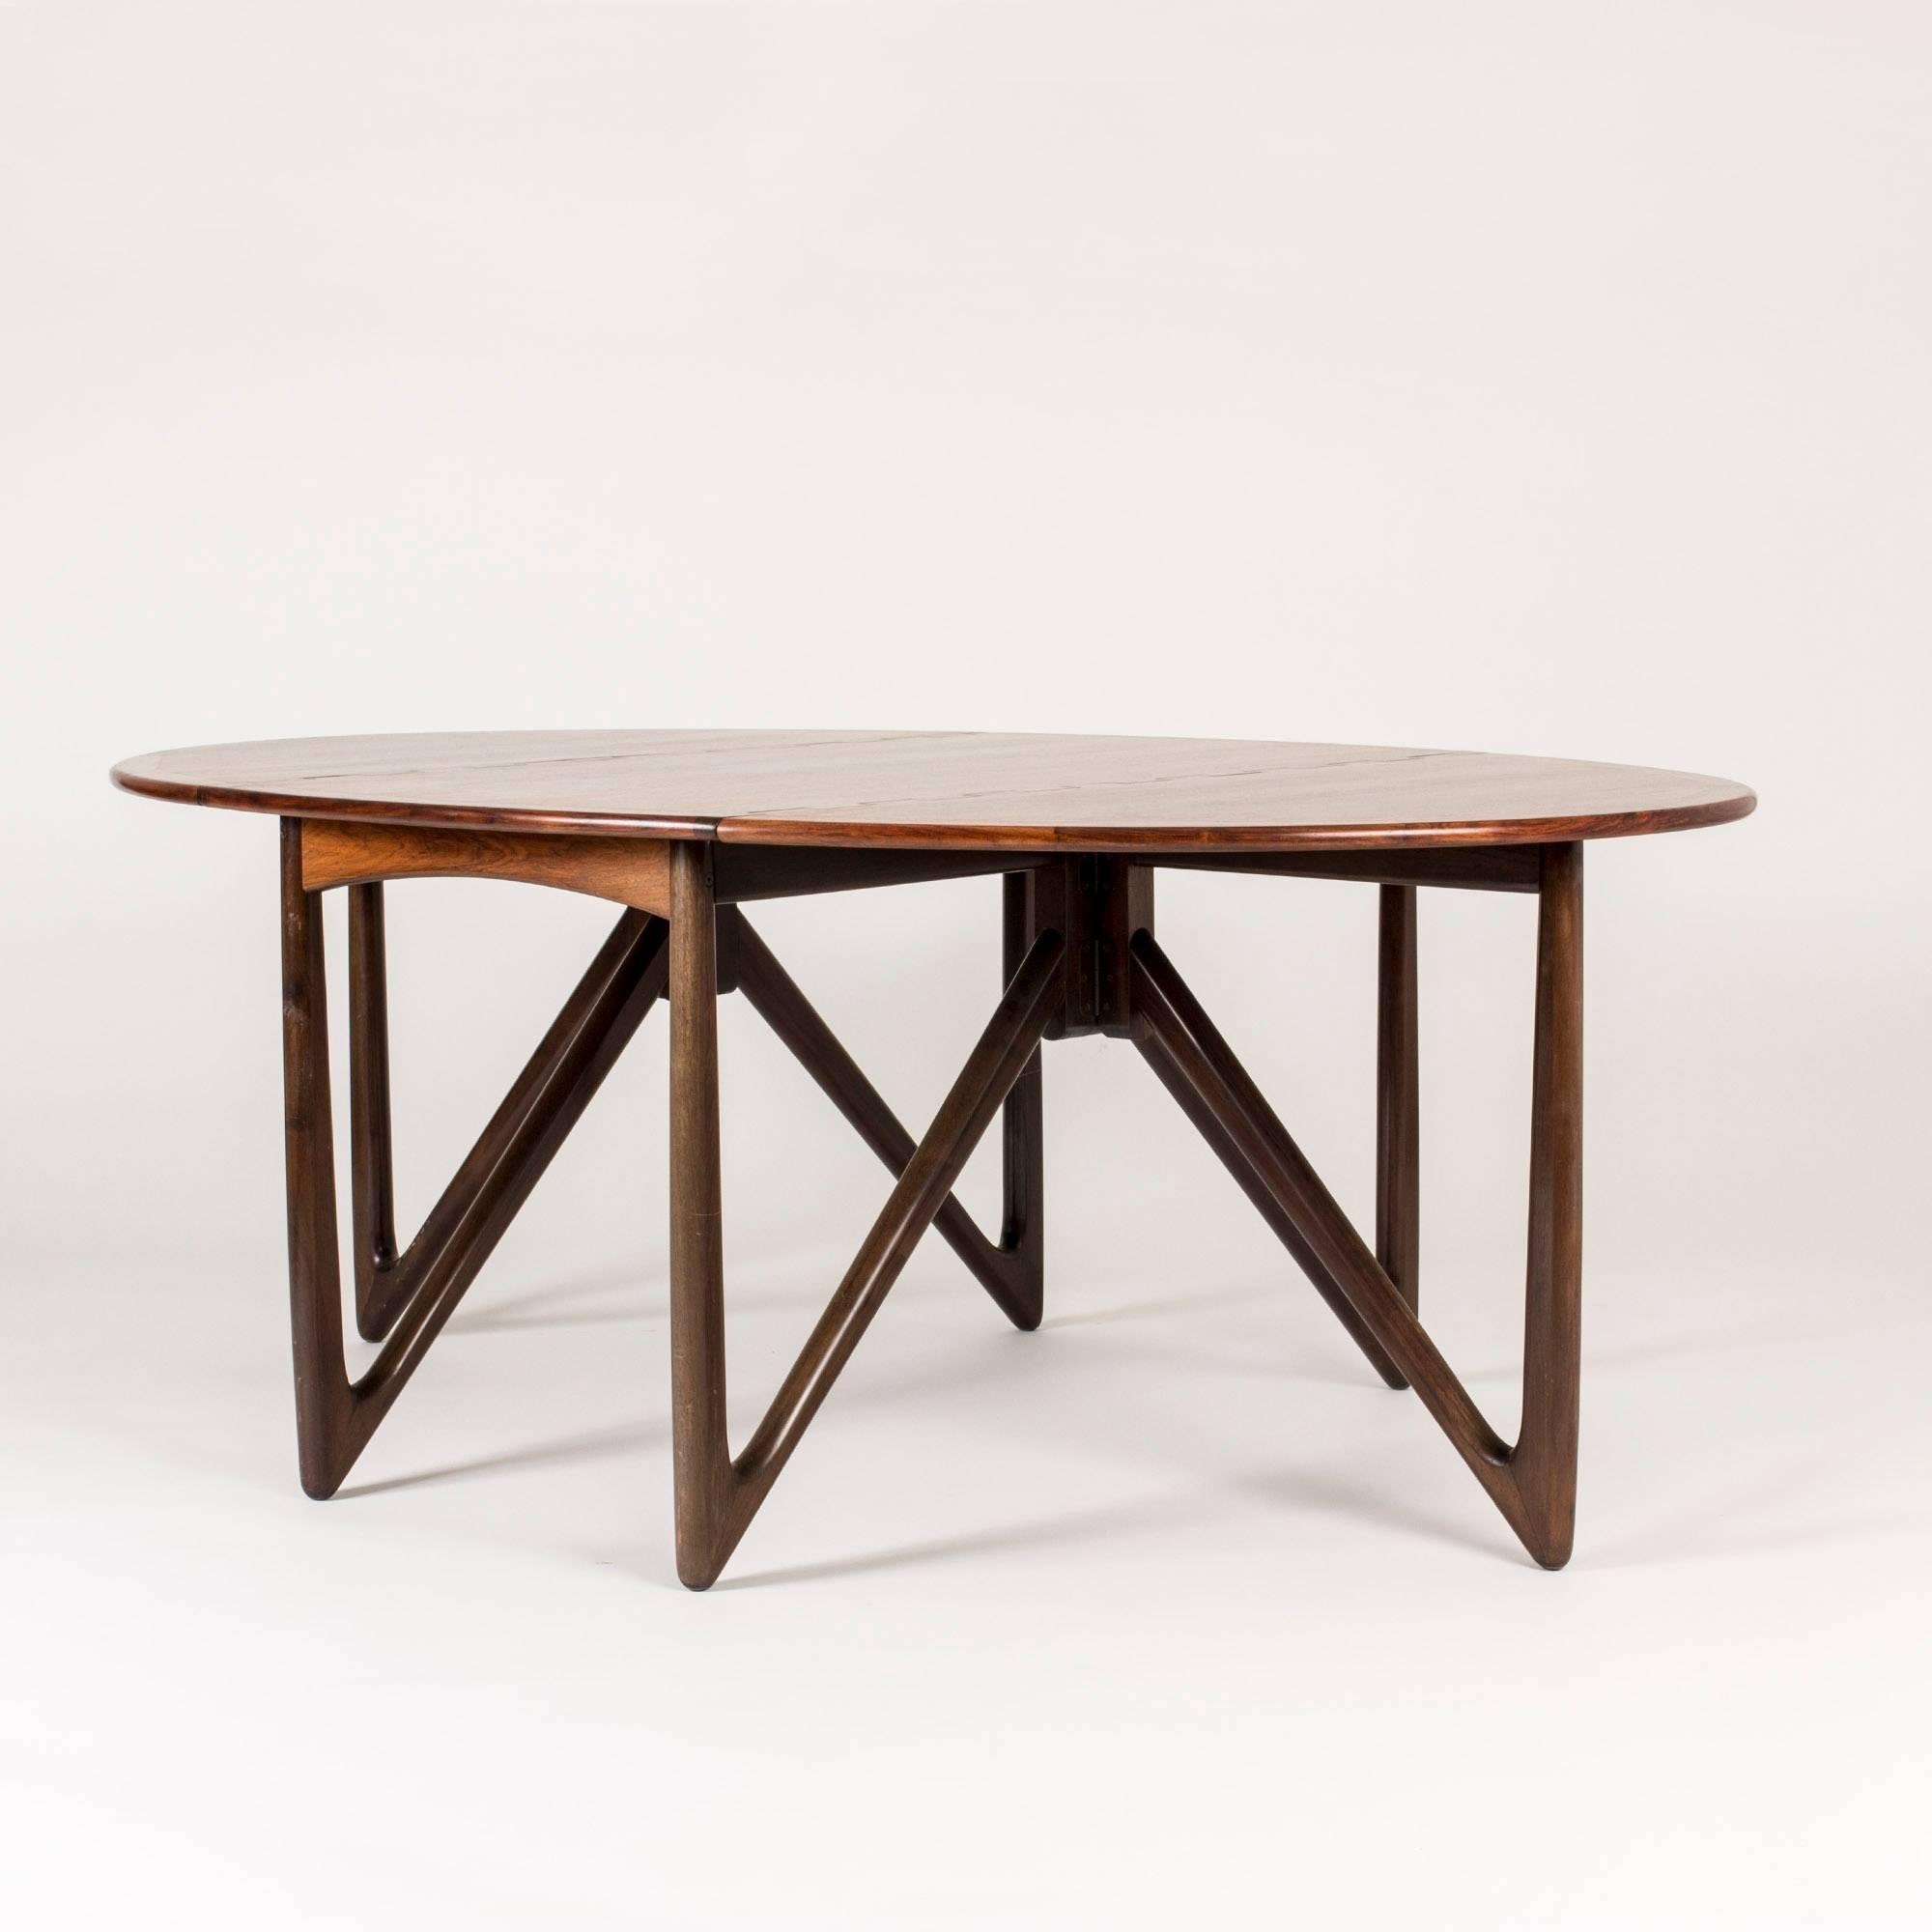 Amazing dining table by Kurt Østervig with a rosewood table top with a dramatic, contrasting pattern. Striking, V-shaped legs pick up the dramatic flair while remaining perfectly refined and functional.